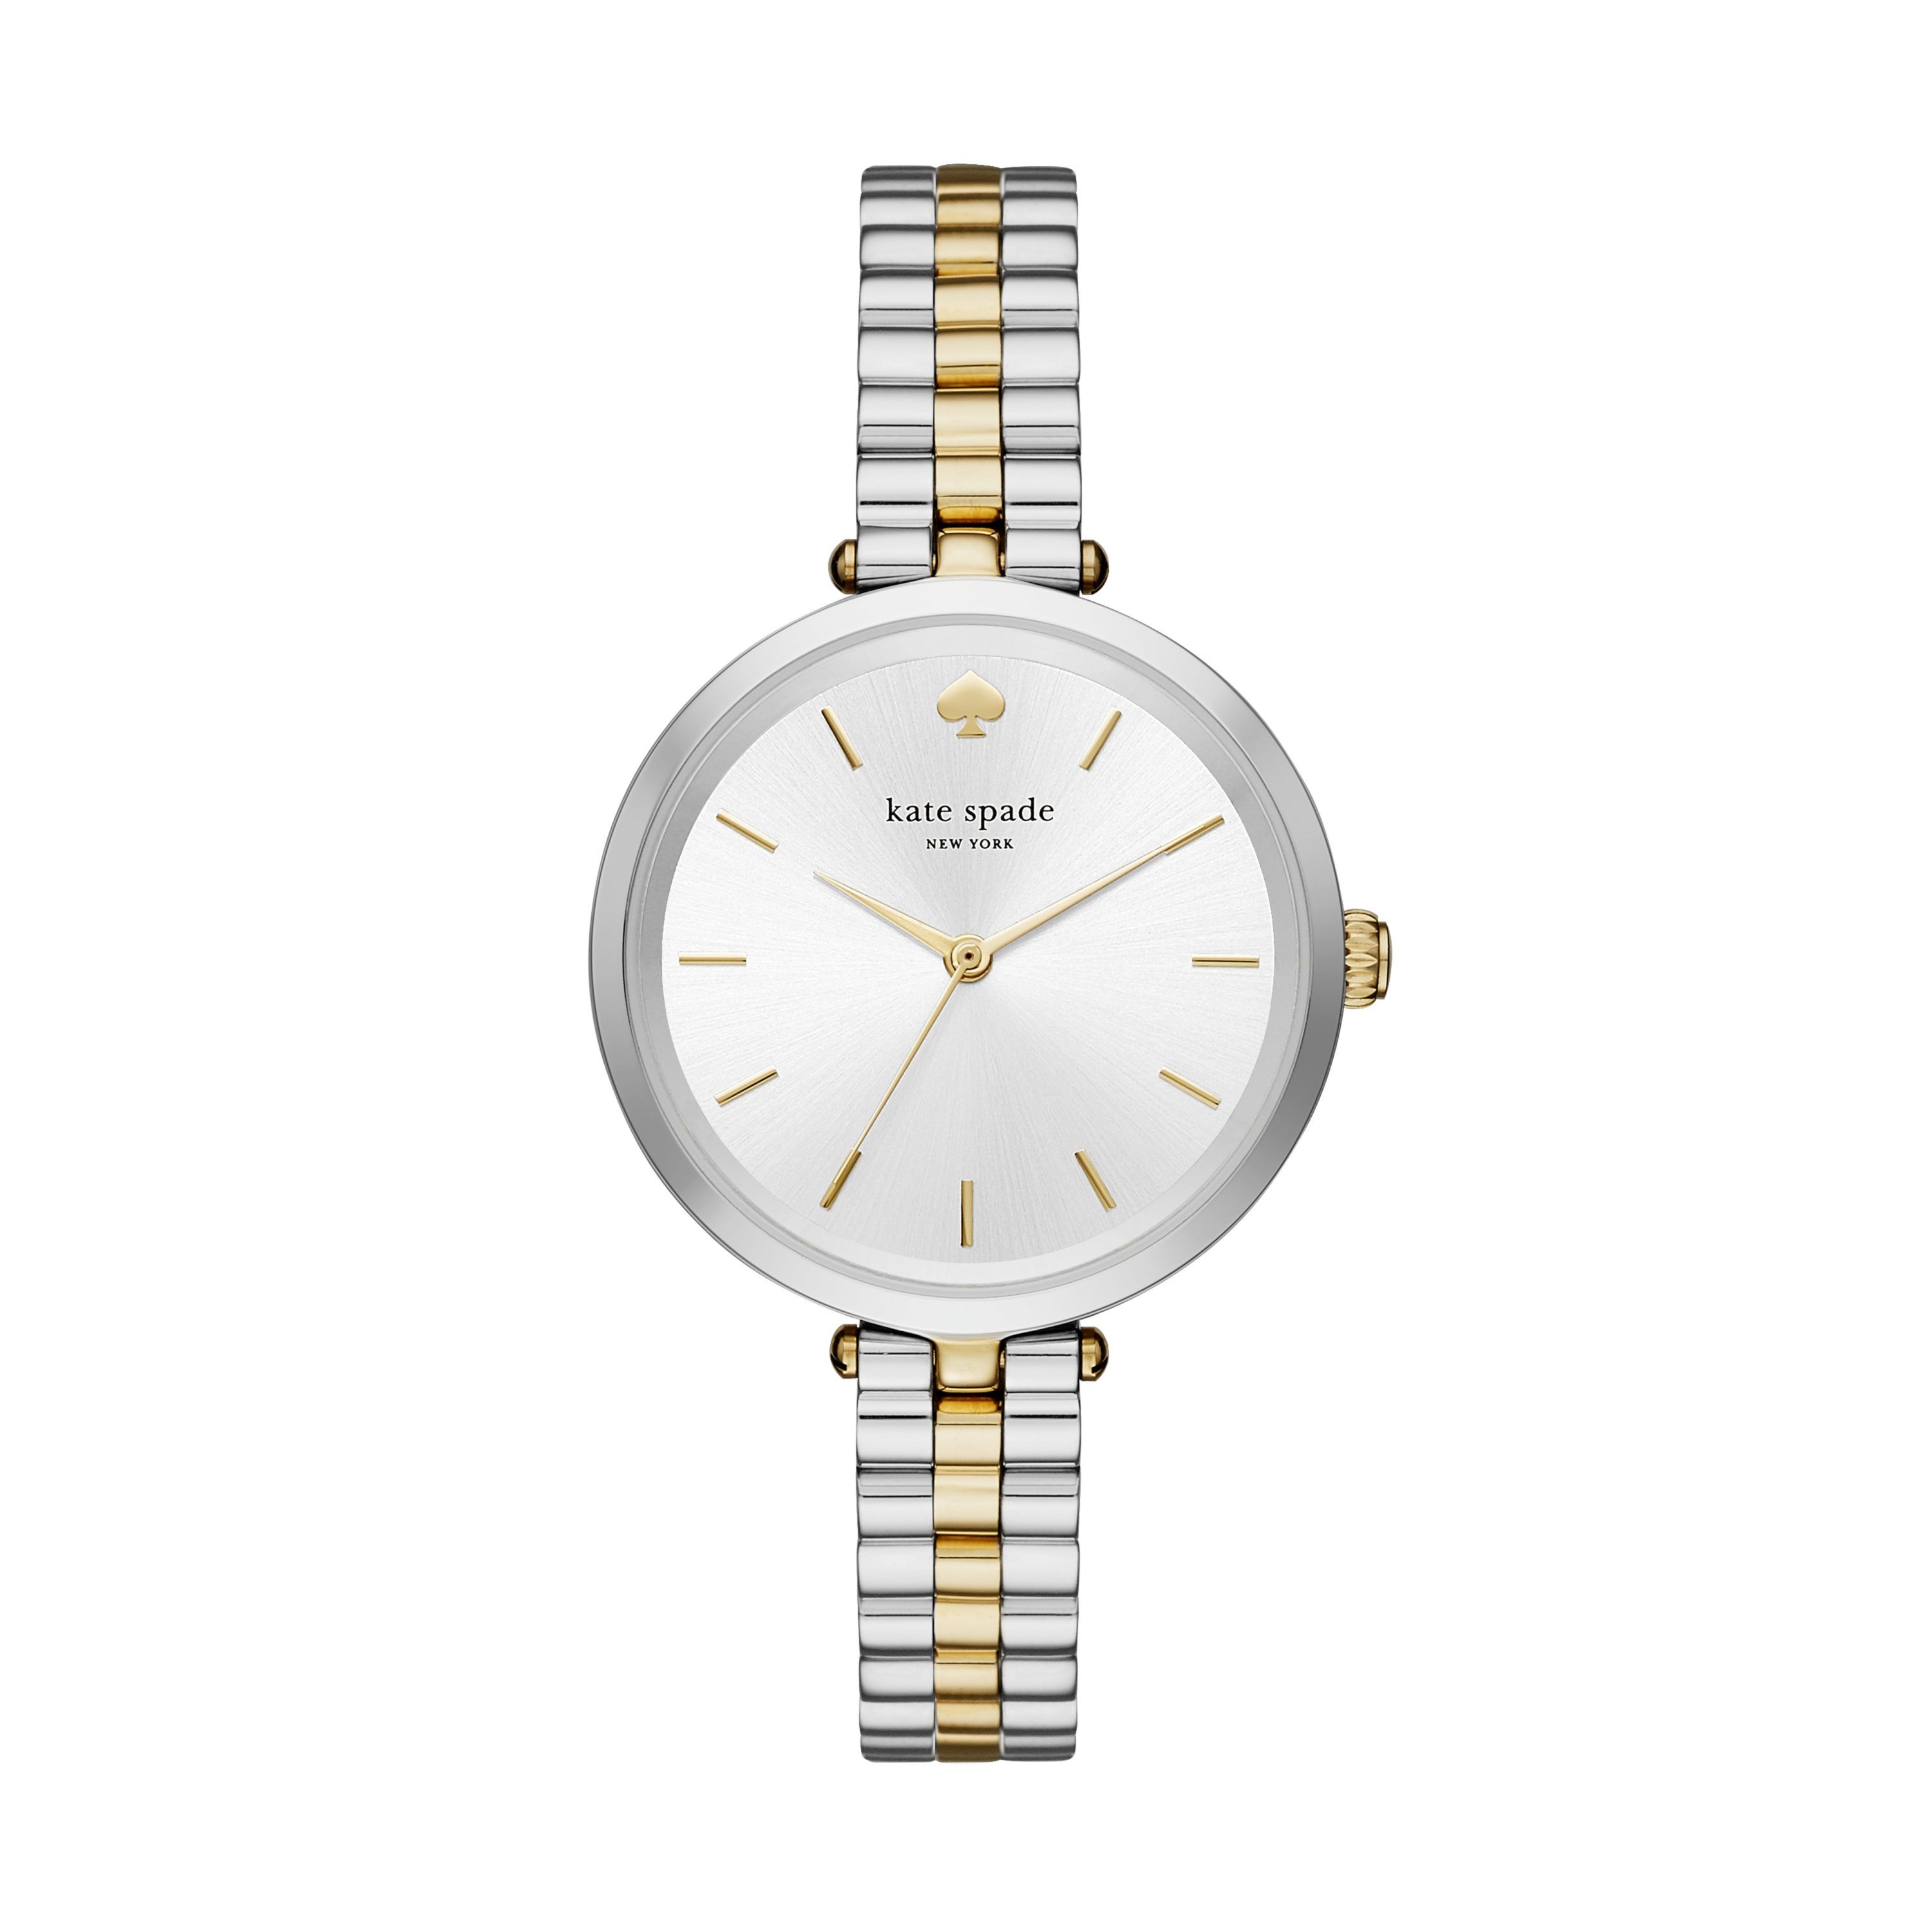 Ladies' Holland Skinny Gold & Silver-Tone Watch, Silver Dial